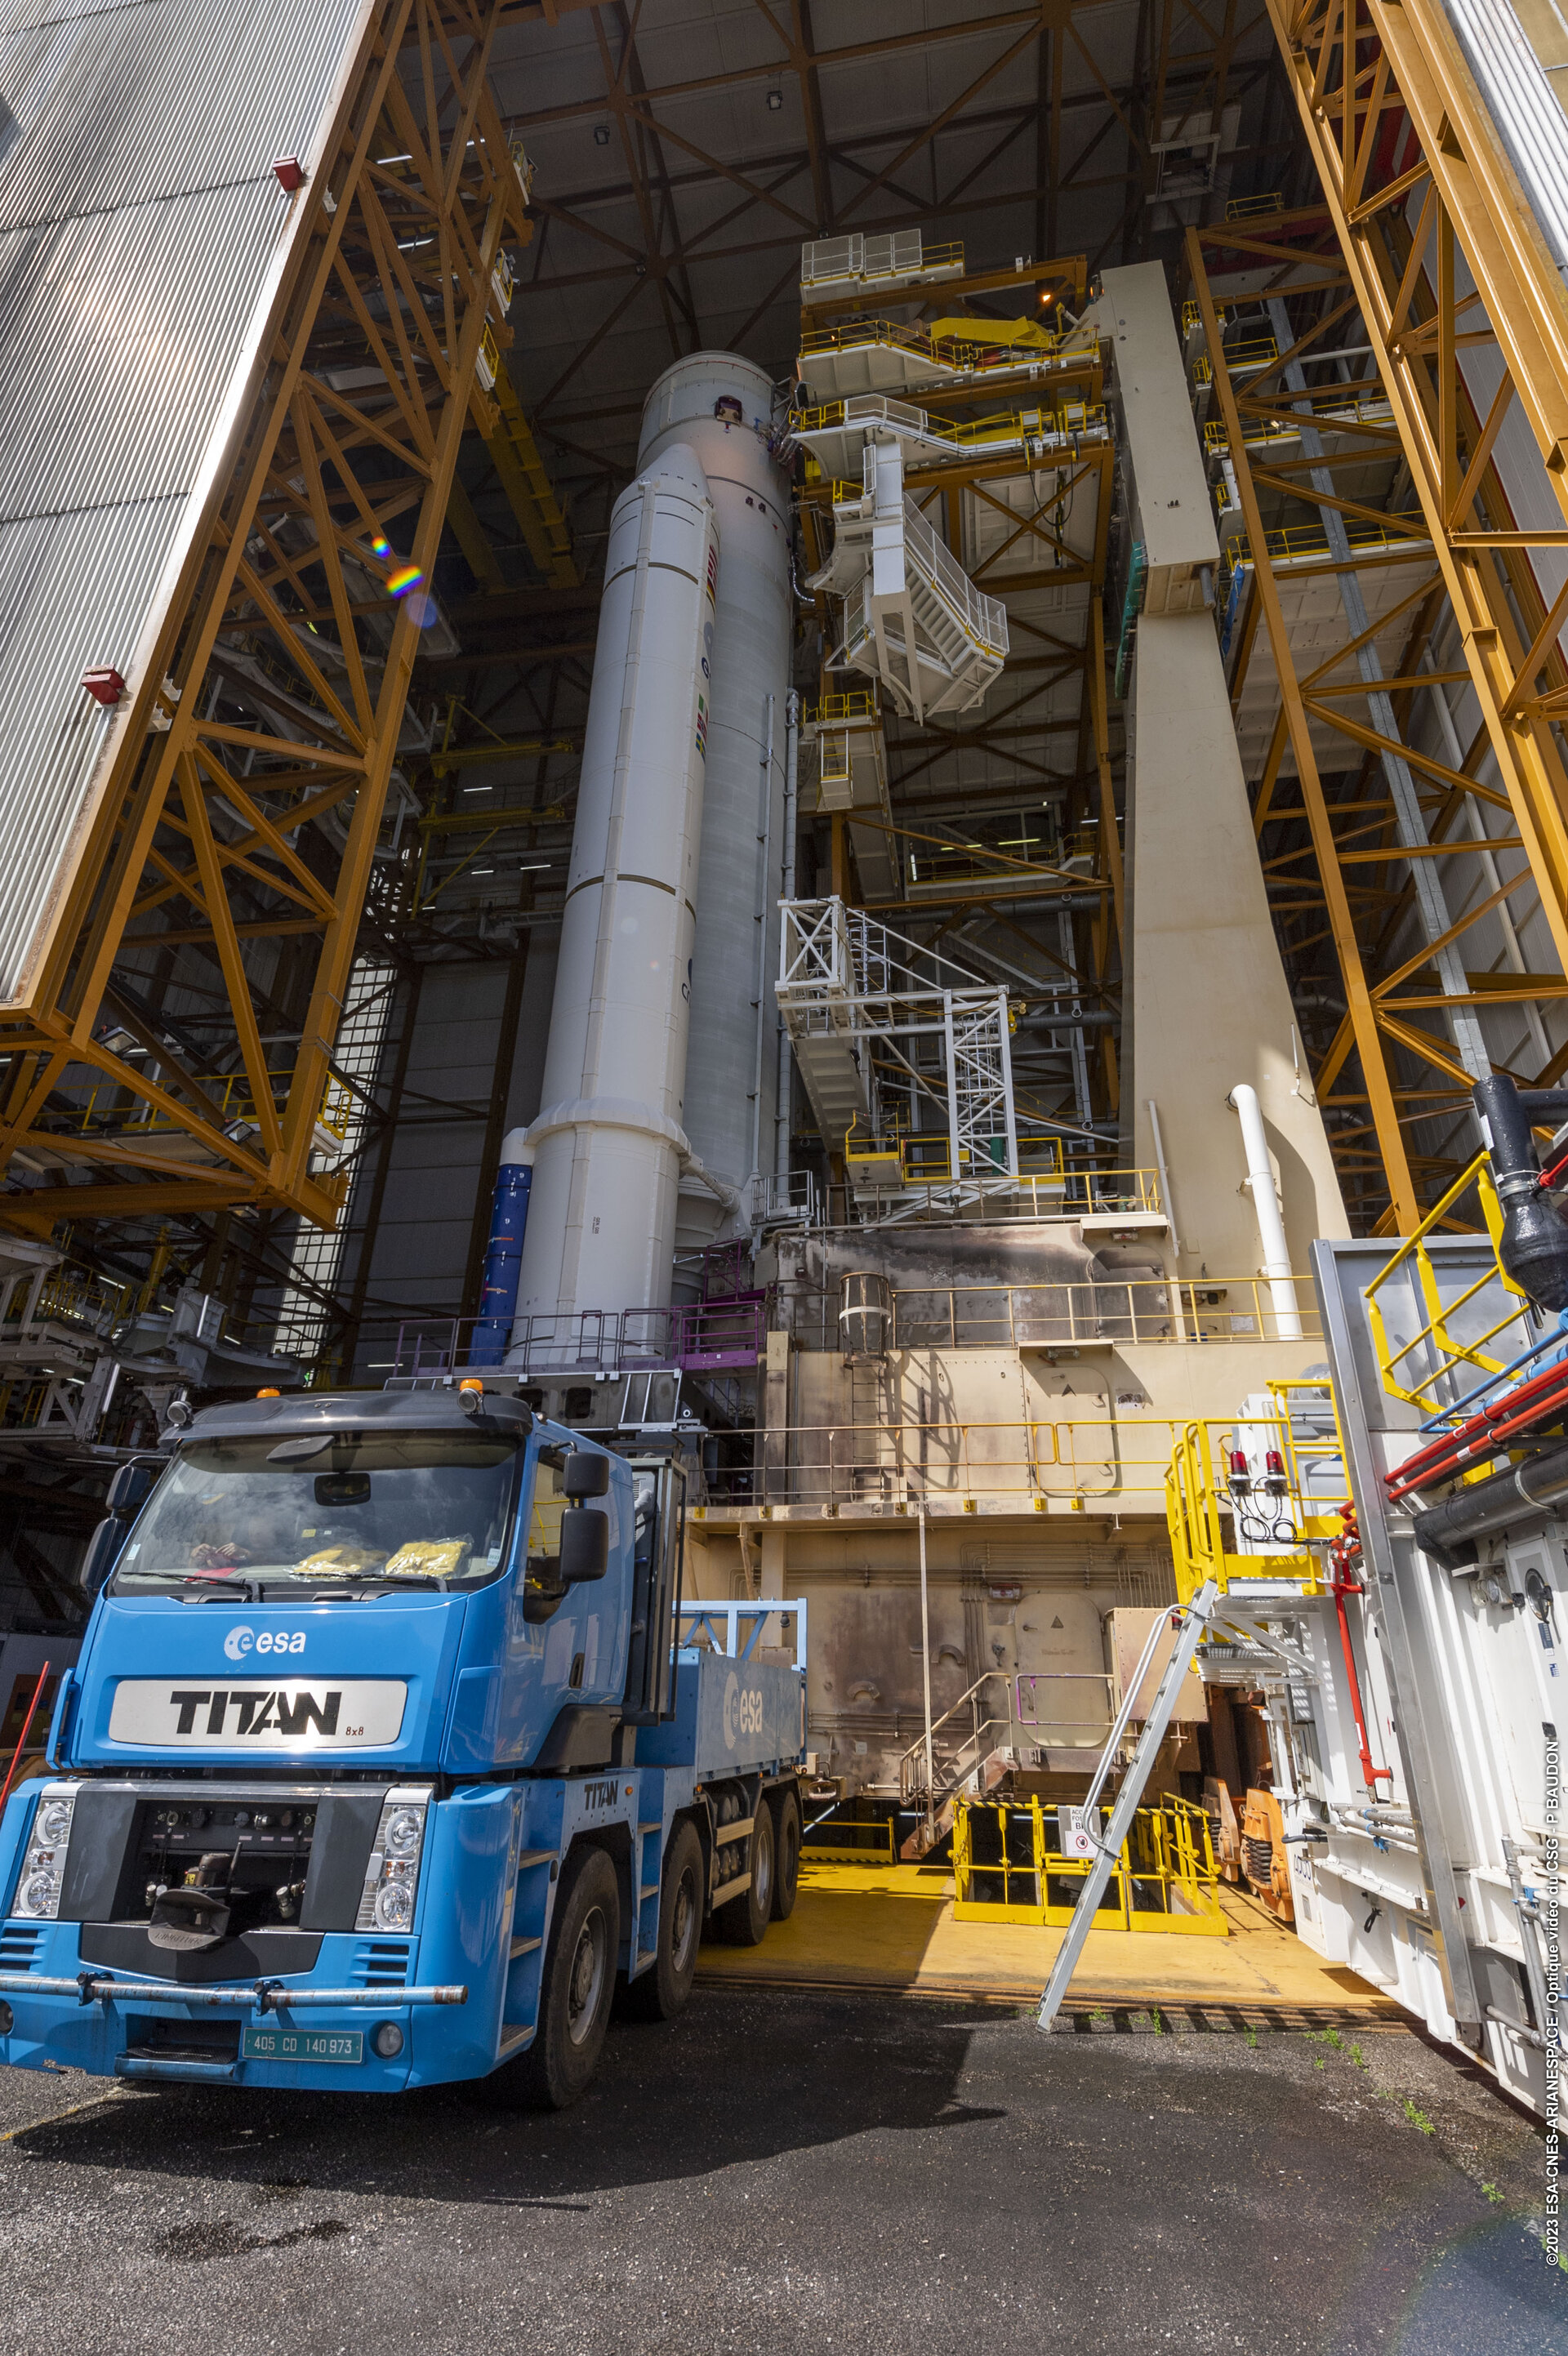 Ariane 5 rocket for the Juice launch being transferred to the final assembly building at Europe's Spaceport in French Guiana for payload integration and last preparation for flight VA260